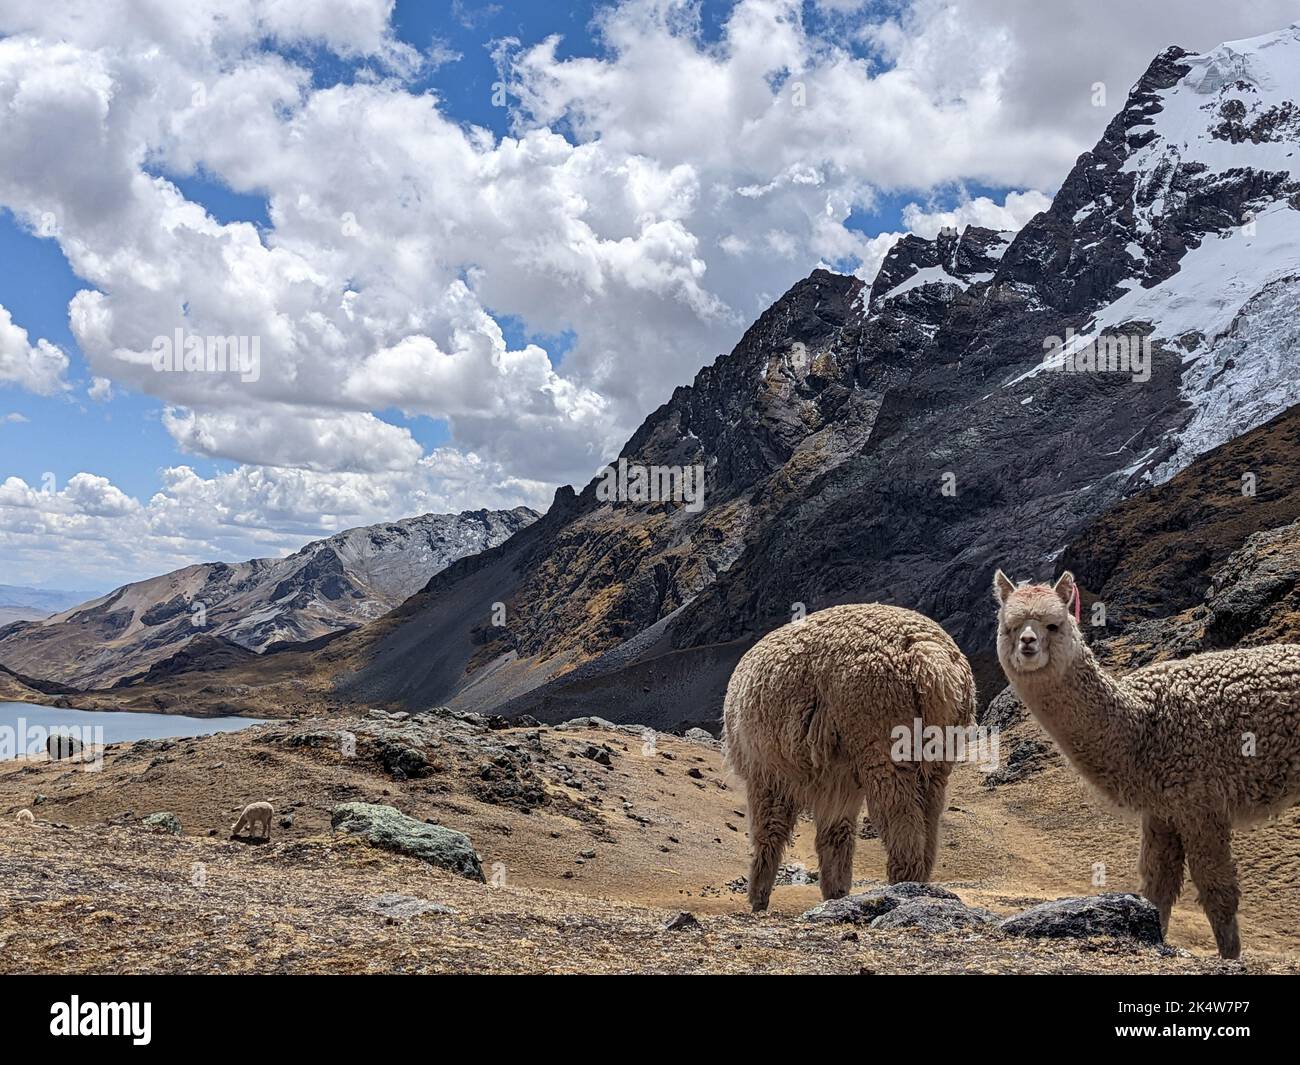 A scenic view of the rocky Cordillera Huayhuash hiking circuit and two lamas grazing Stock Photo